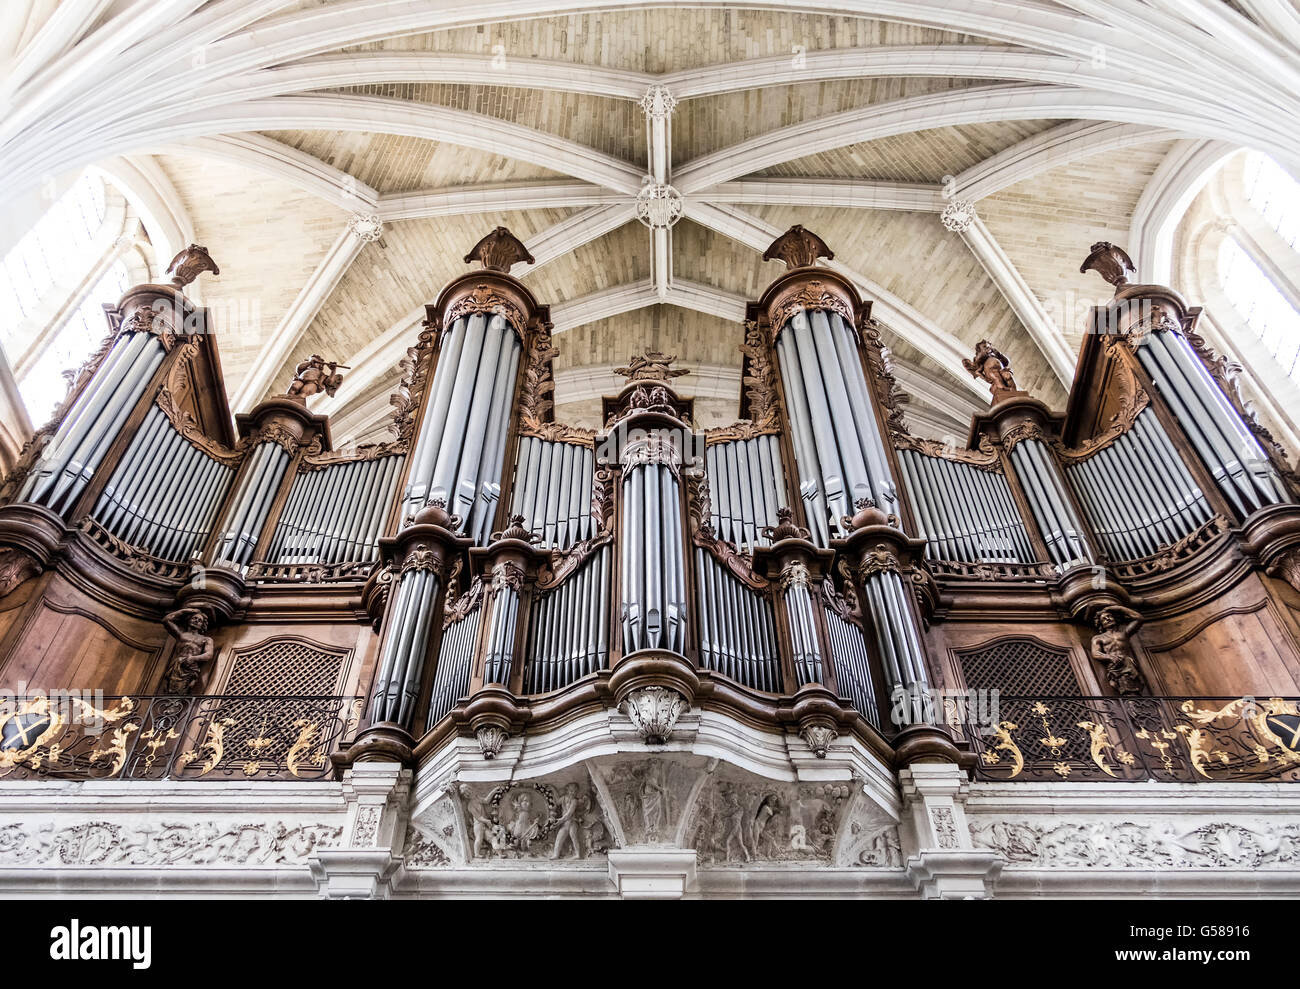 BORDEAUX, FRANCE - 17 JULY 2015 - The magnificent  beautifully detailed pipe organ inside the Gothic style Bordeaux Cathedral (C Stock Photo